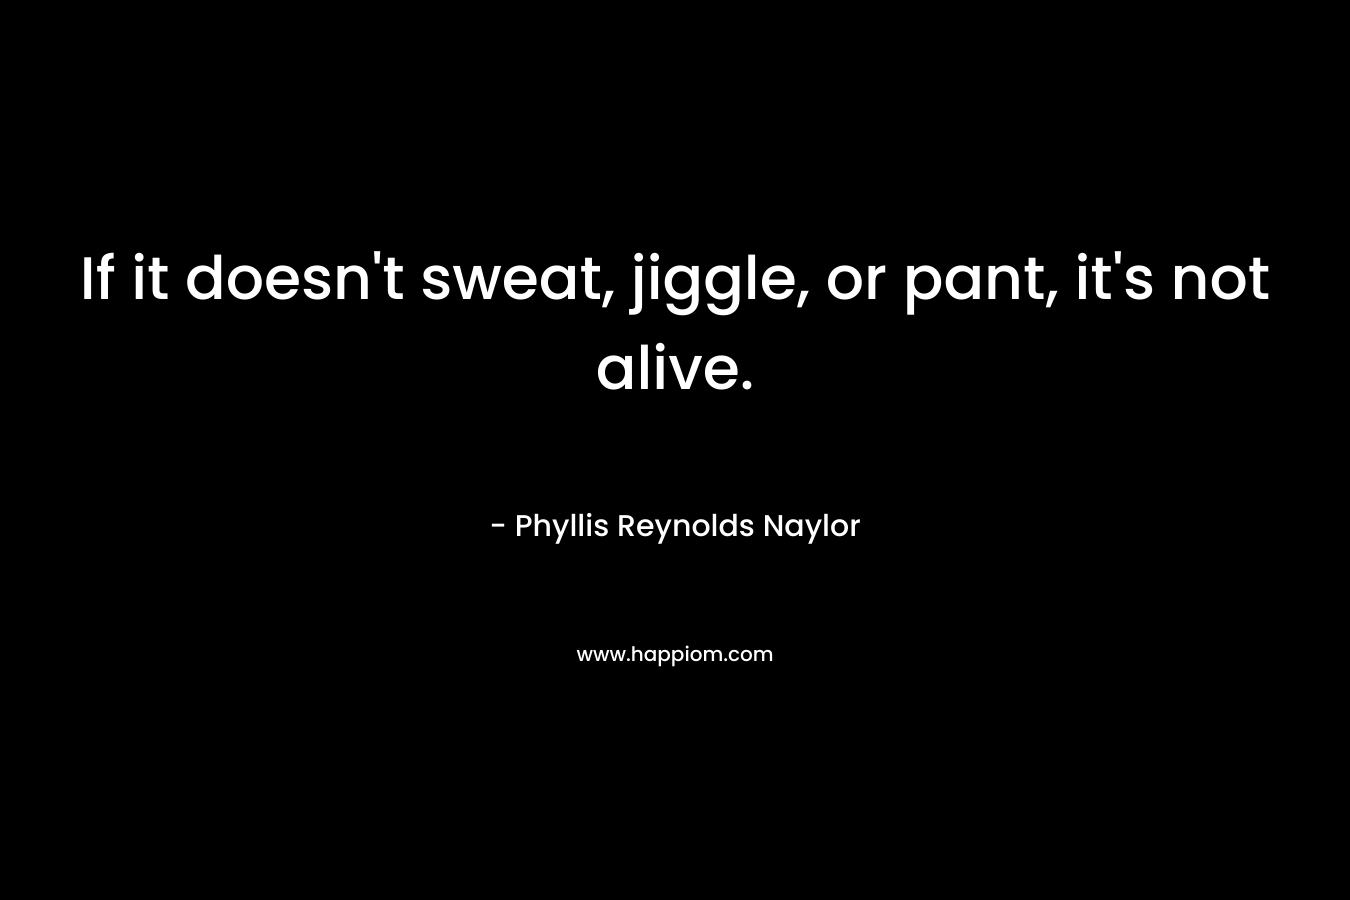 If it doesn't sweat, jiggle, or pant, it's not alive.